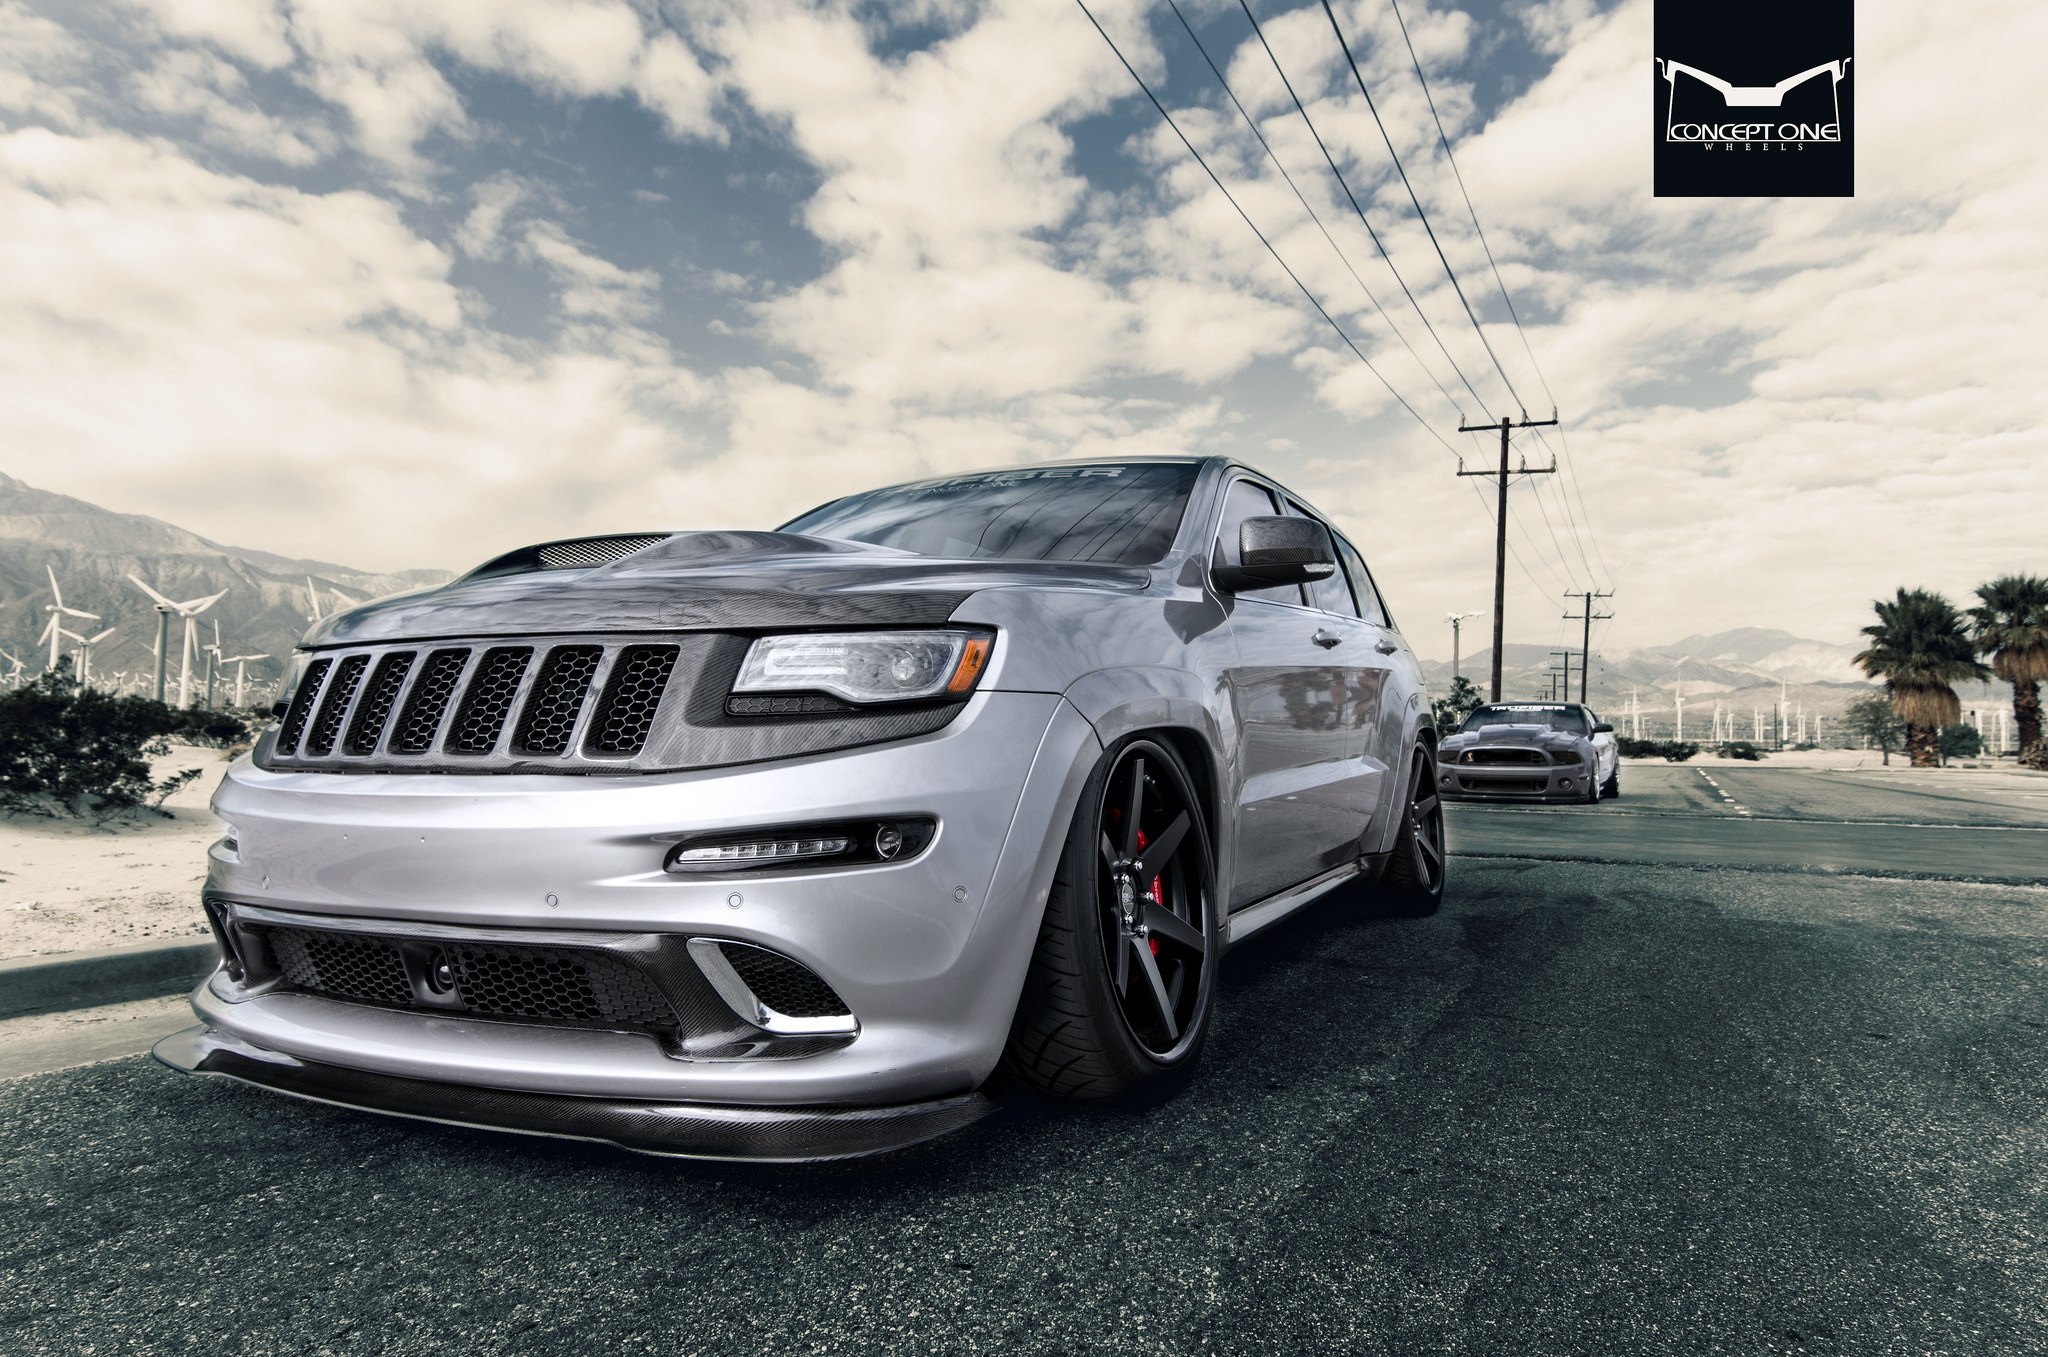 Air Lifted Street Weapon - Grand Cherokee SRT - Photo by Concept ONE